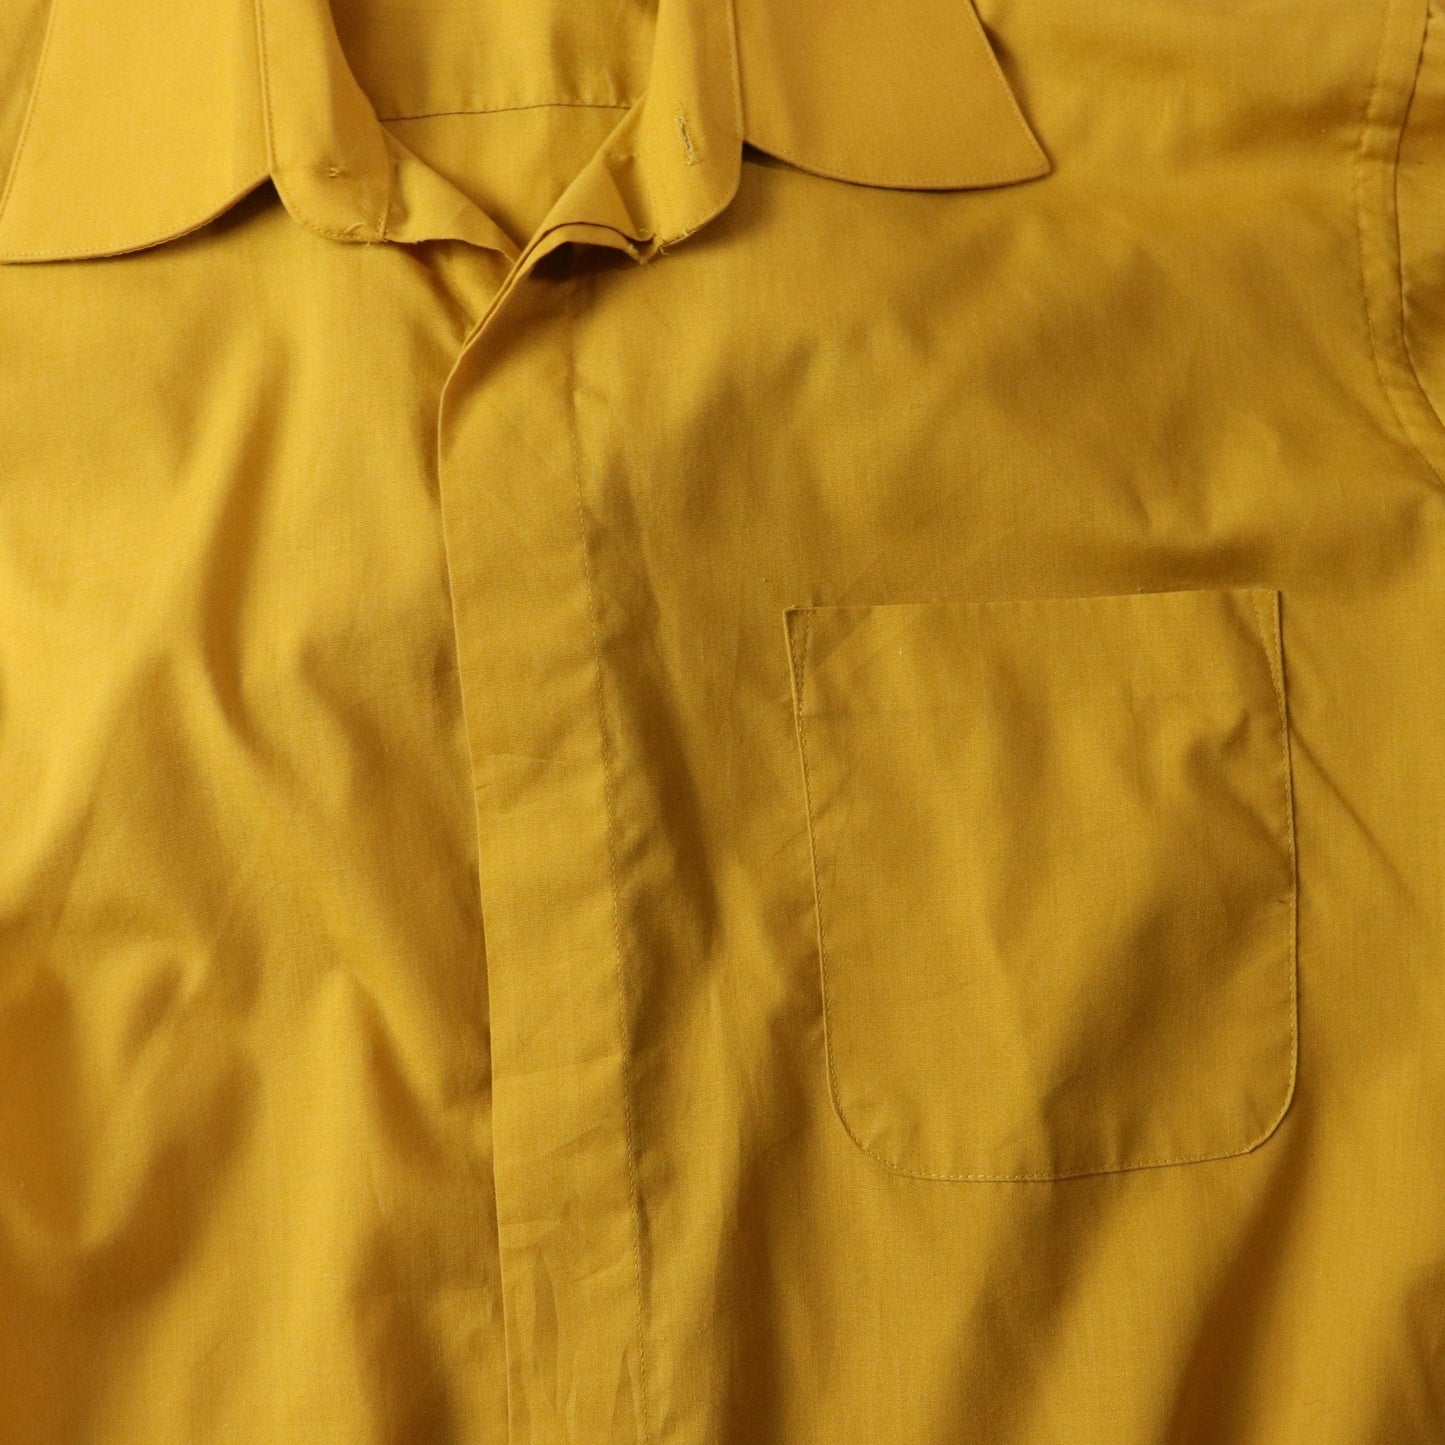 Other Button Up Shirts Vintage Carlo Pacini Button Up Shirt Size 16 (L)